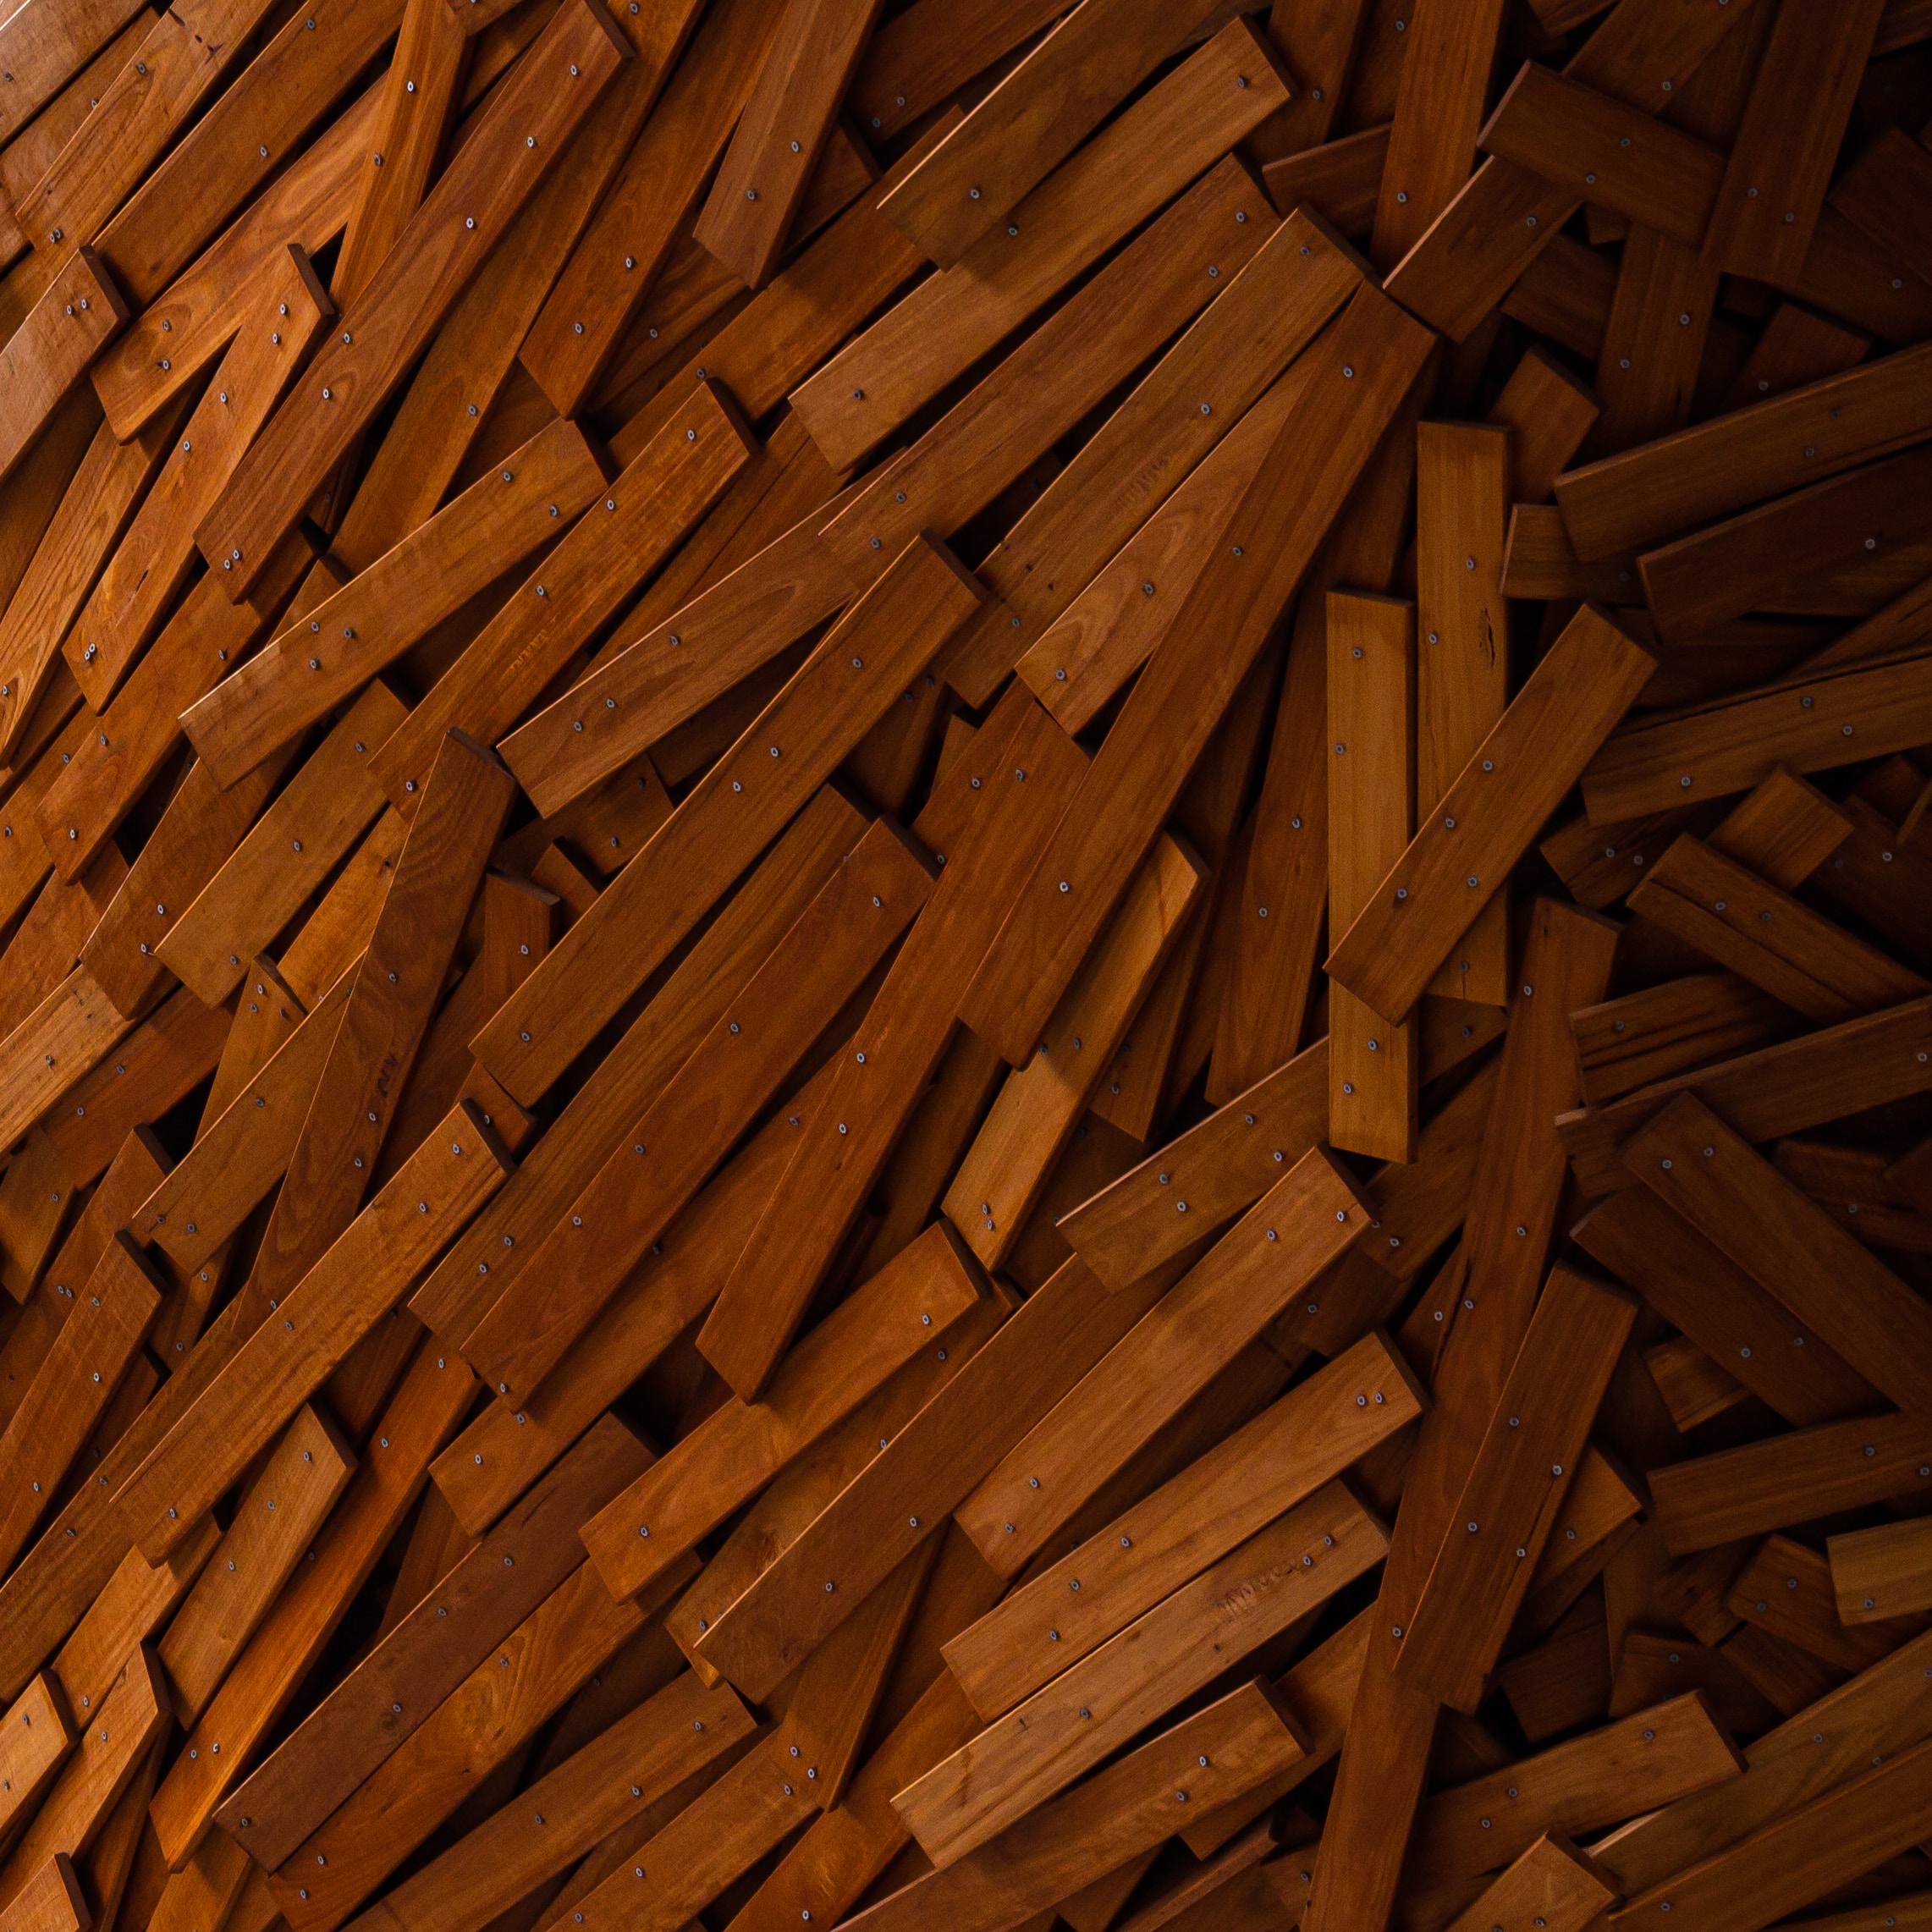 Mobile wallpaper wood, wooden, texture, textures, brown, planks, strips